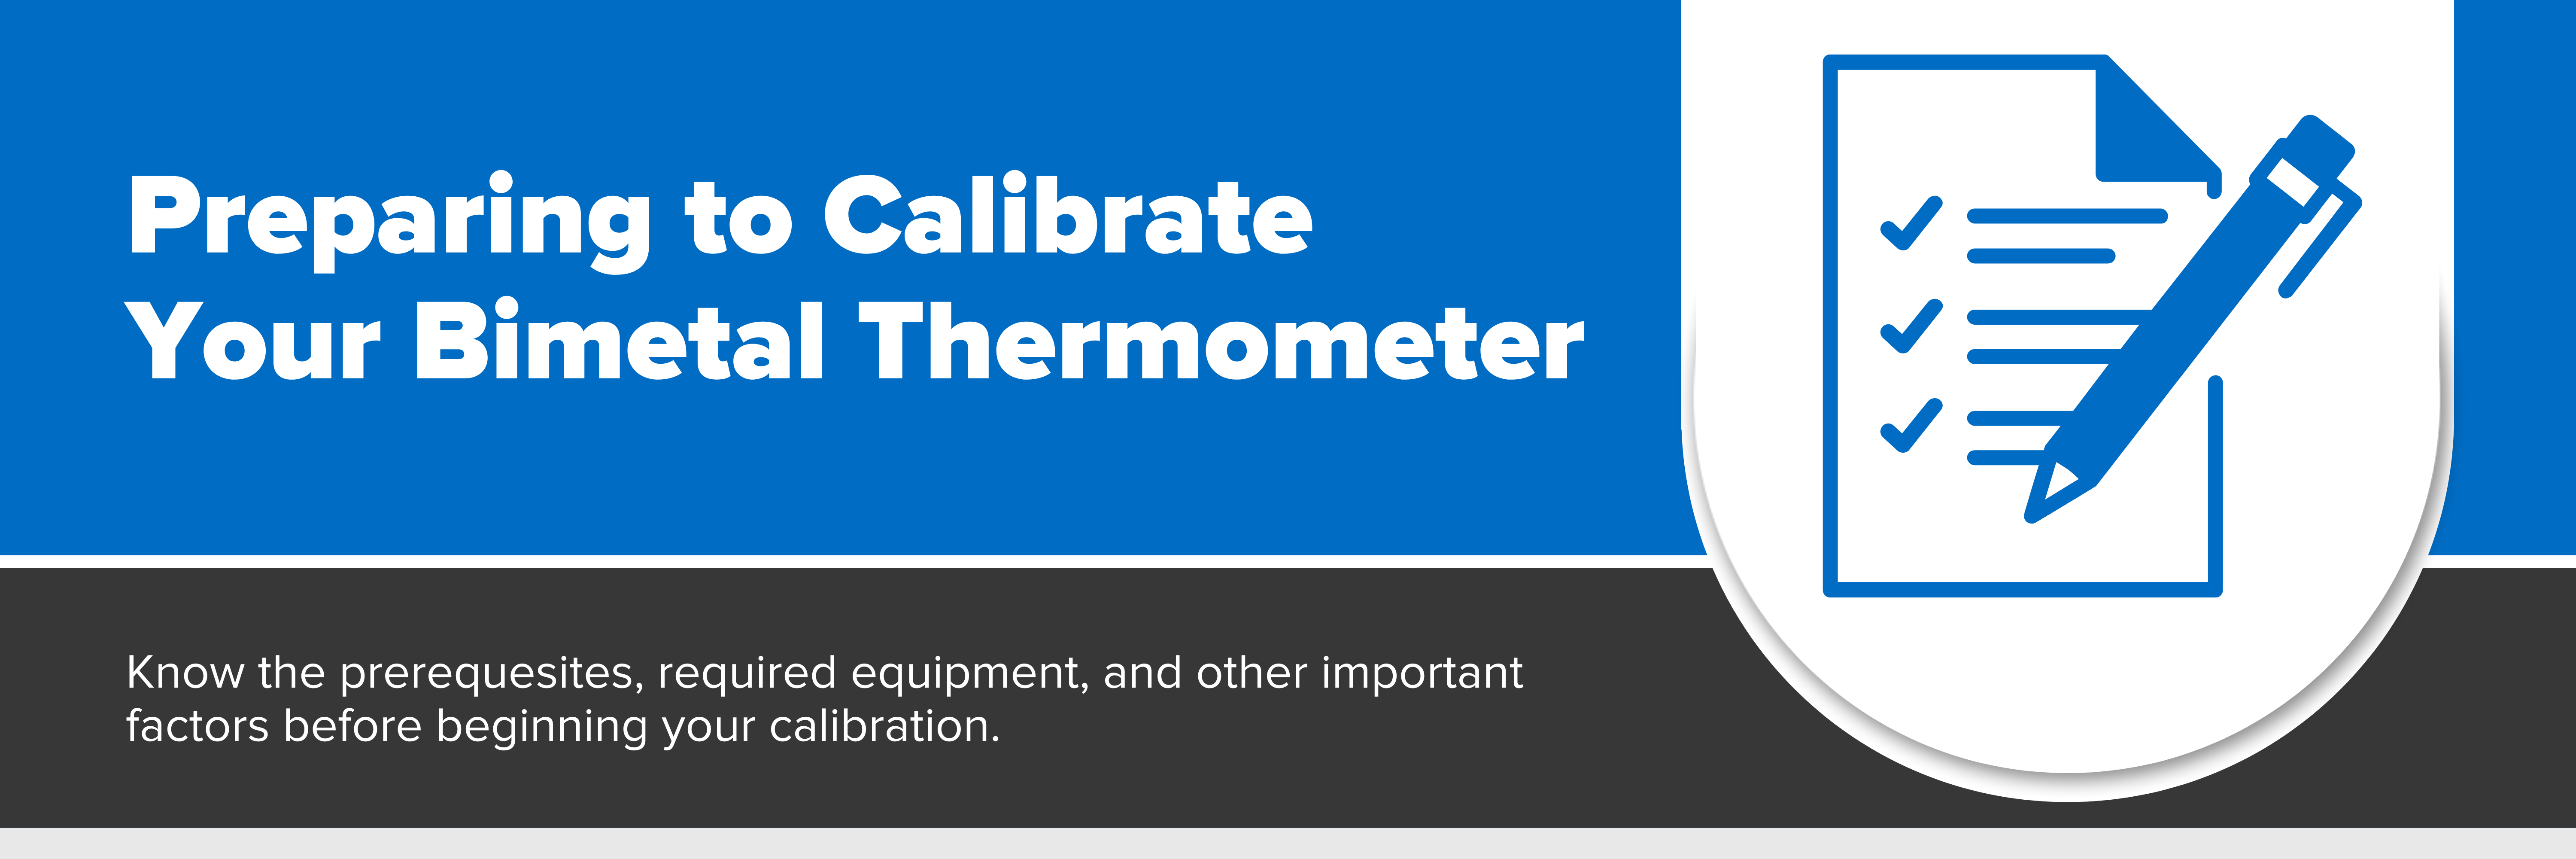 Header image with text "Preparing to Calibrate Your Bimetal Thermometer"